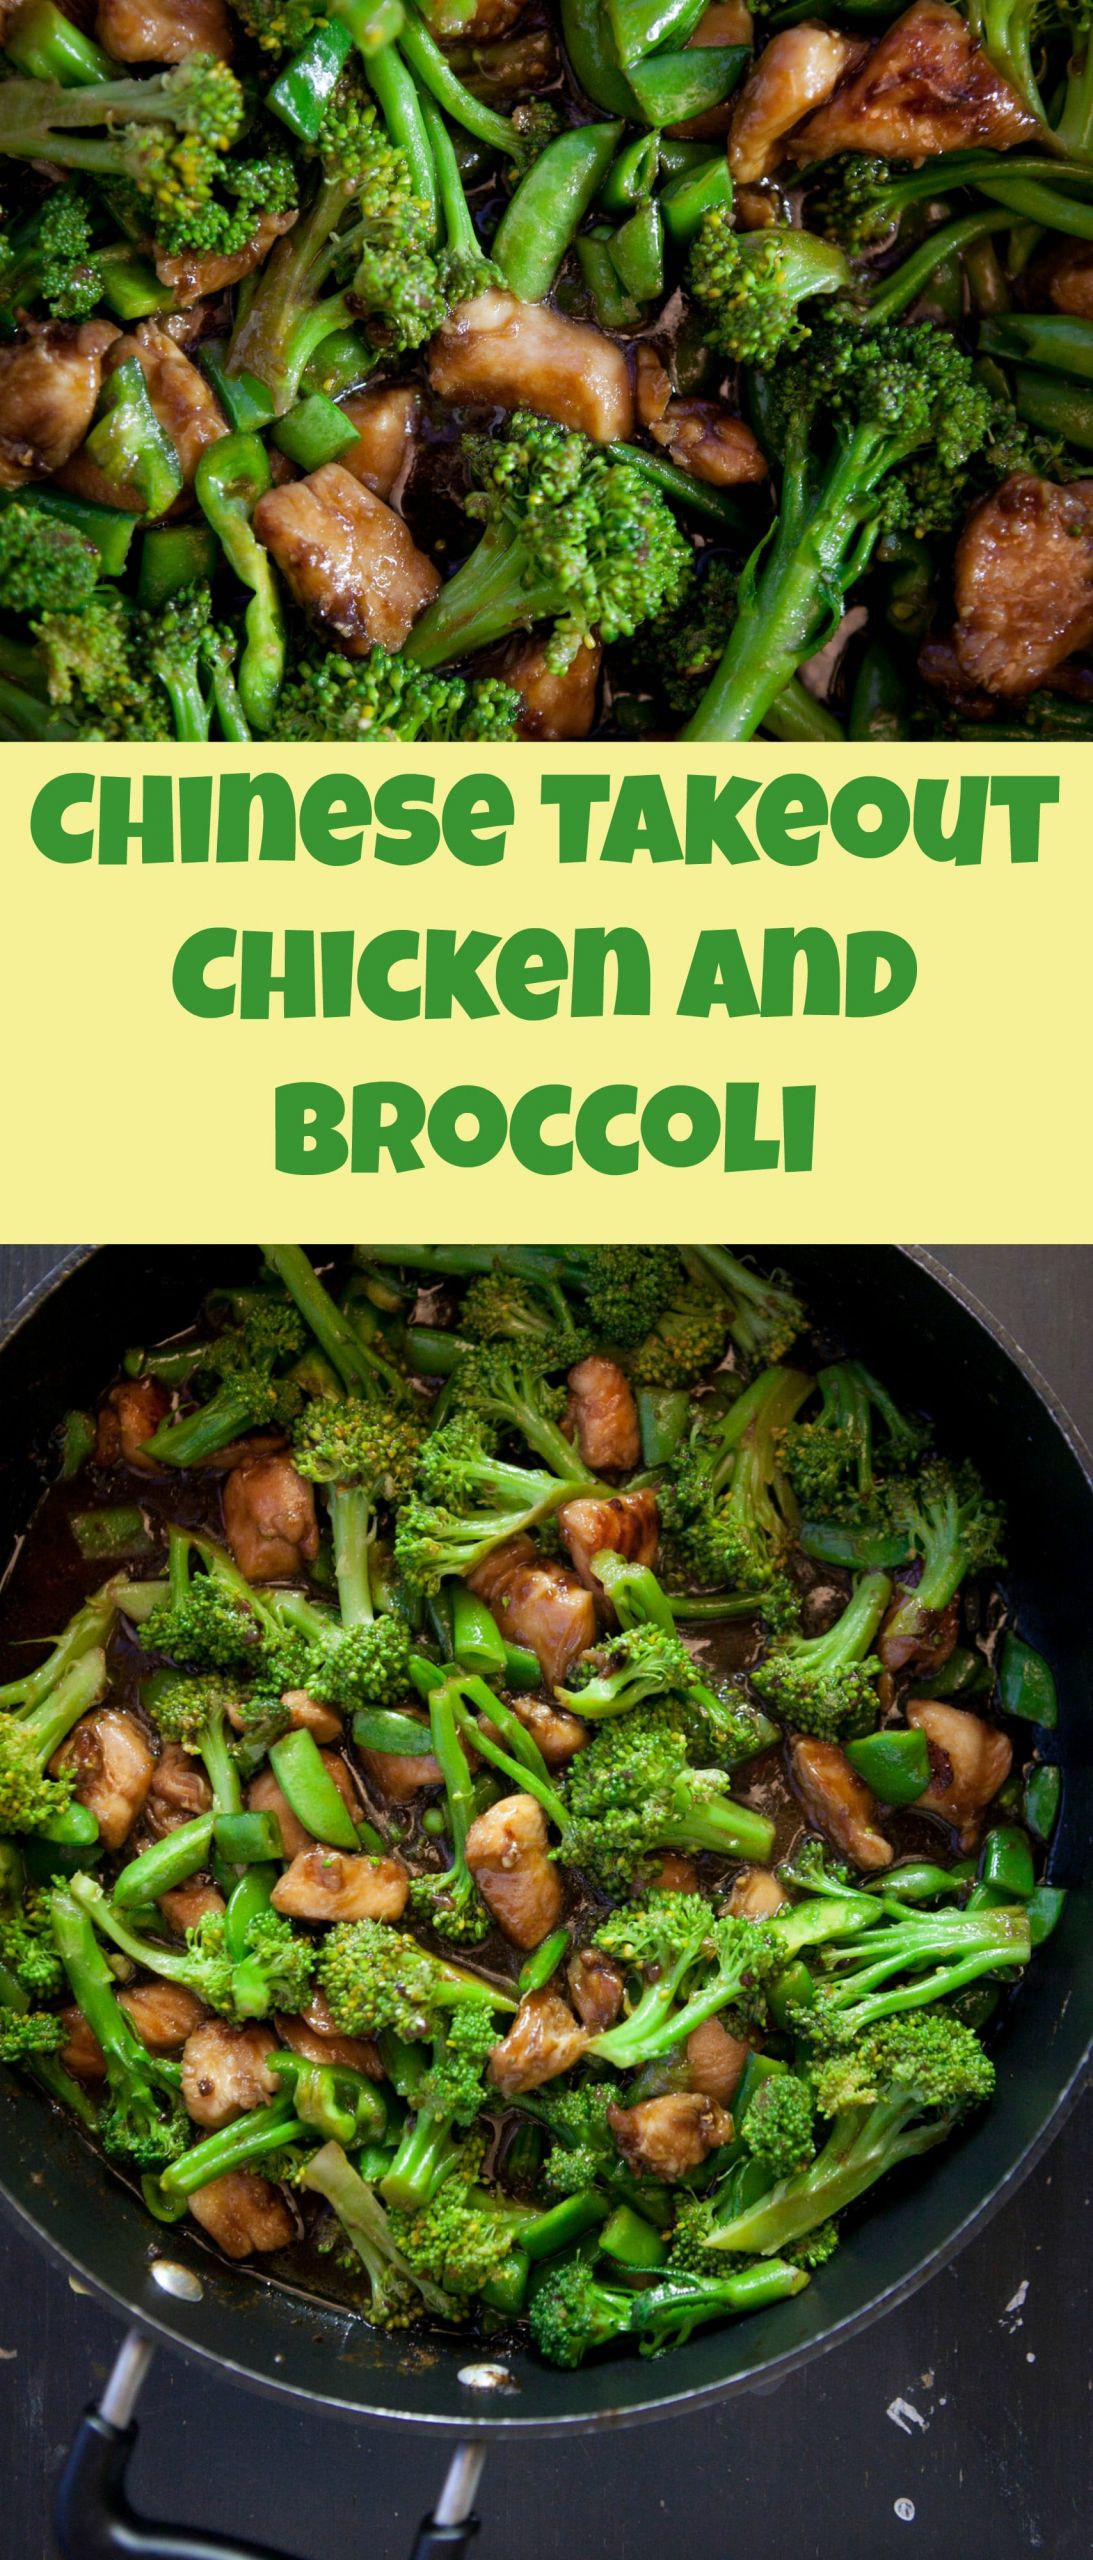 Chicken With Broccoli Chinese
 Chinese Takeout Chicken and Broccoli Brooklyn Farm Girl